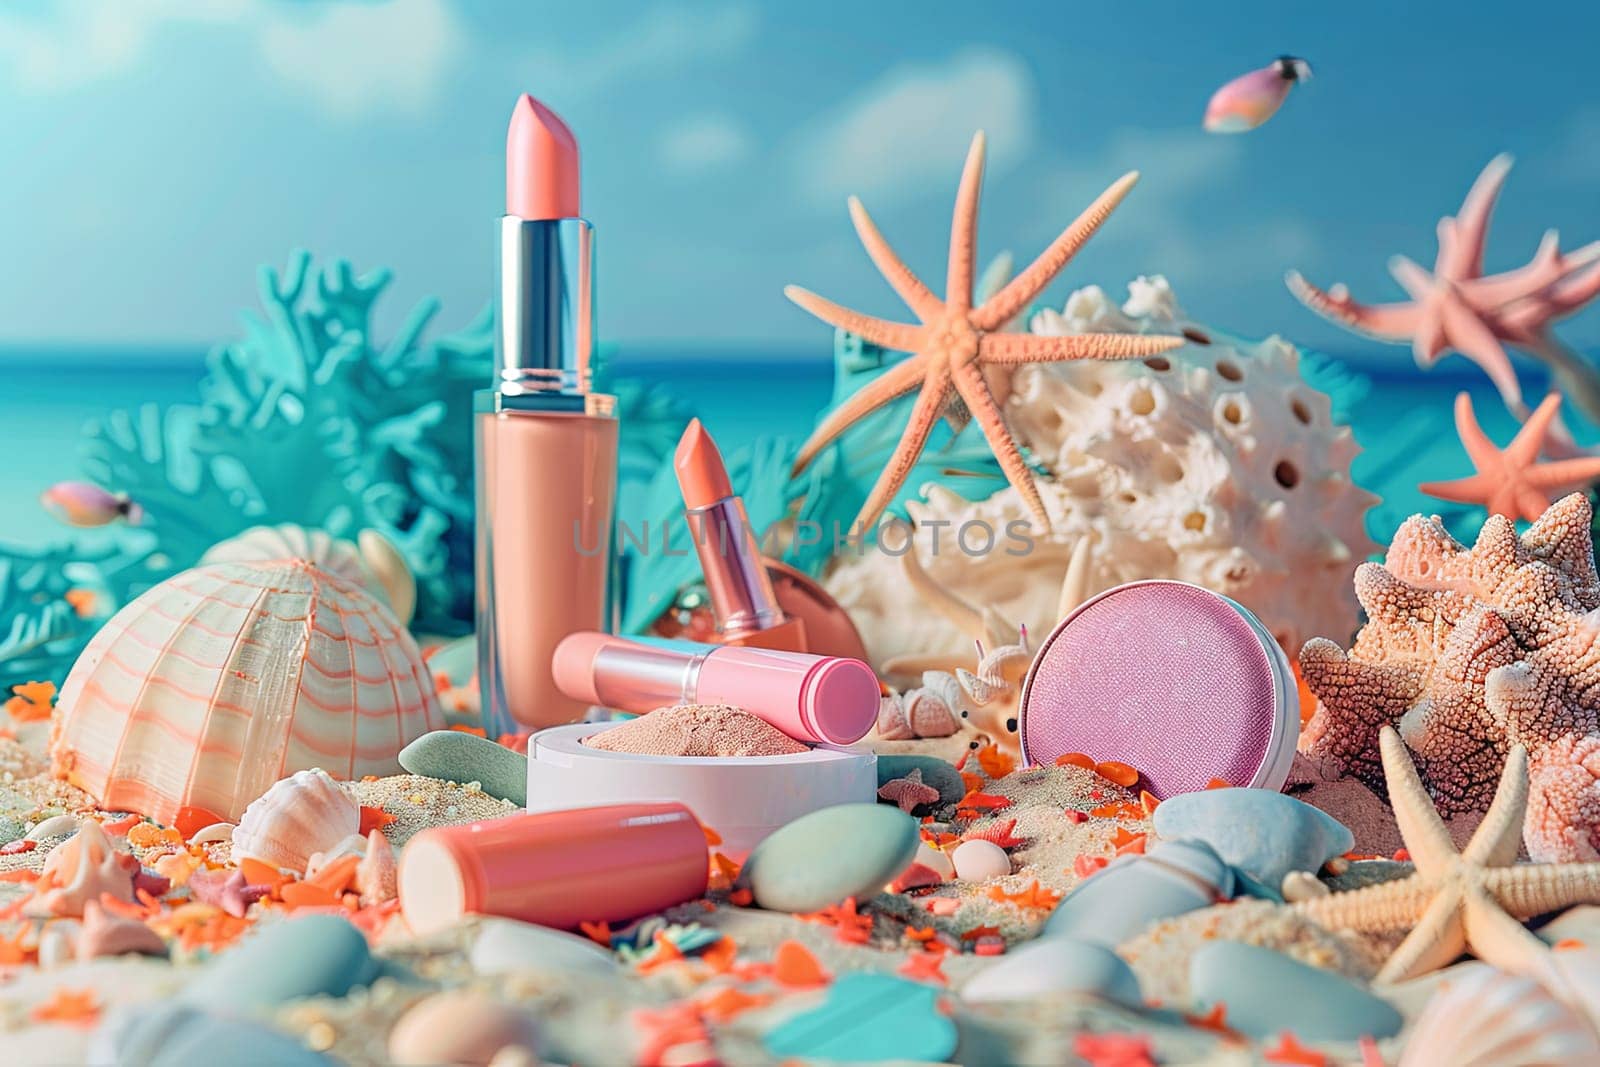 Close-up view of various cosmetics products arranged neatly on a sandy beach with the ocean in the background.